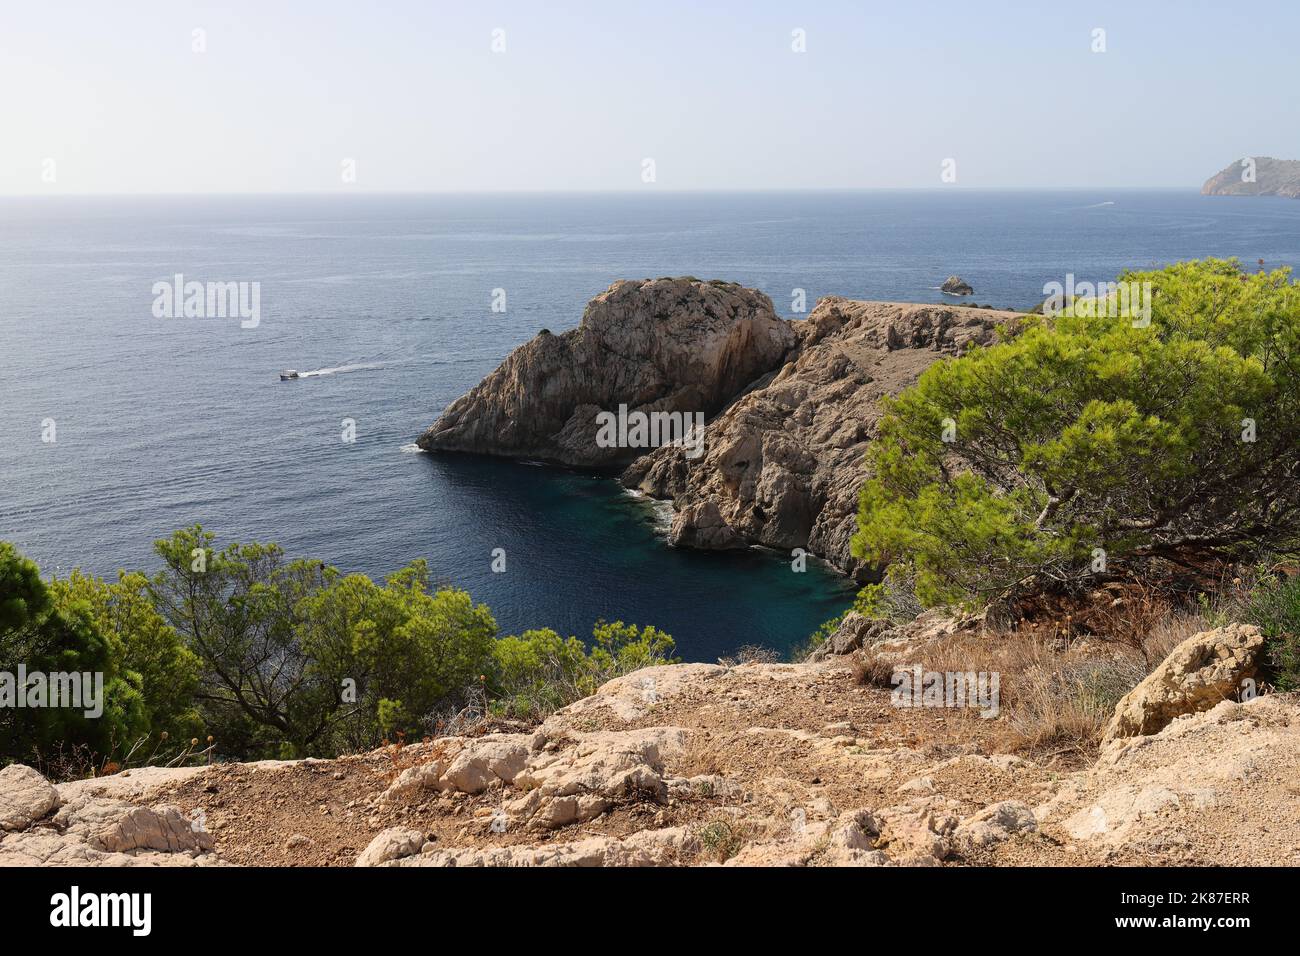 view into a beautiful small bay near Cala Ratjada, Mallorca with rocky outcrops and green vegetation in the foreground Stock Photo